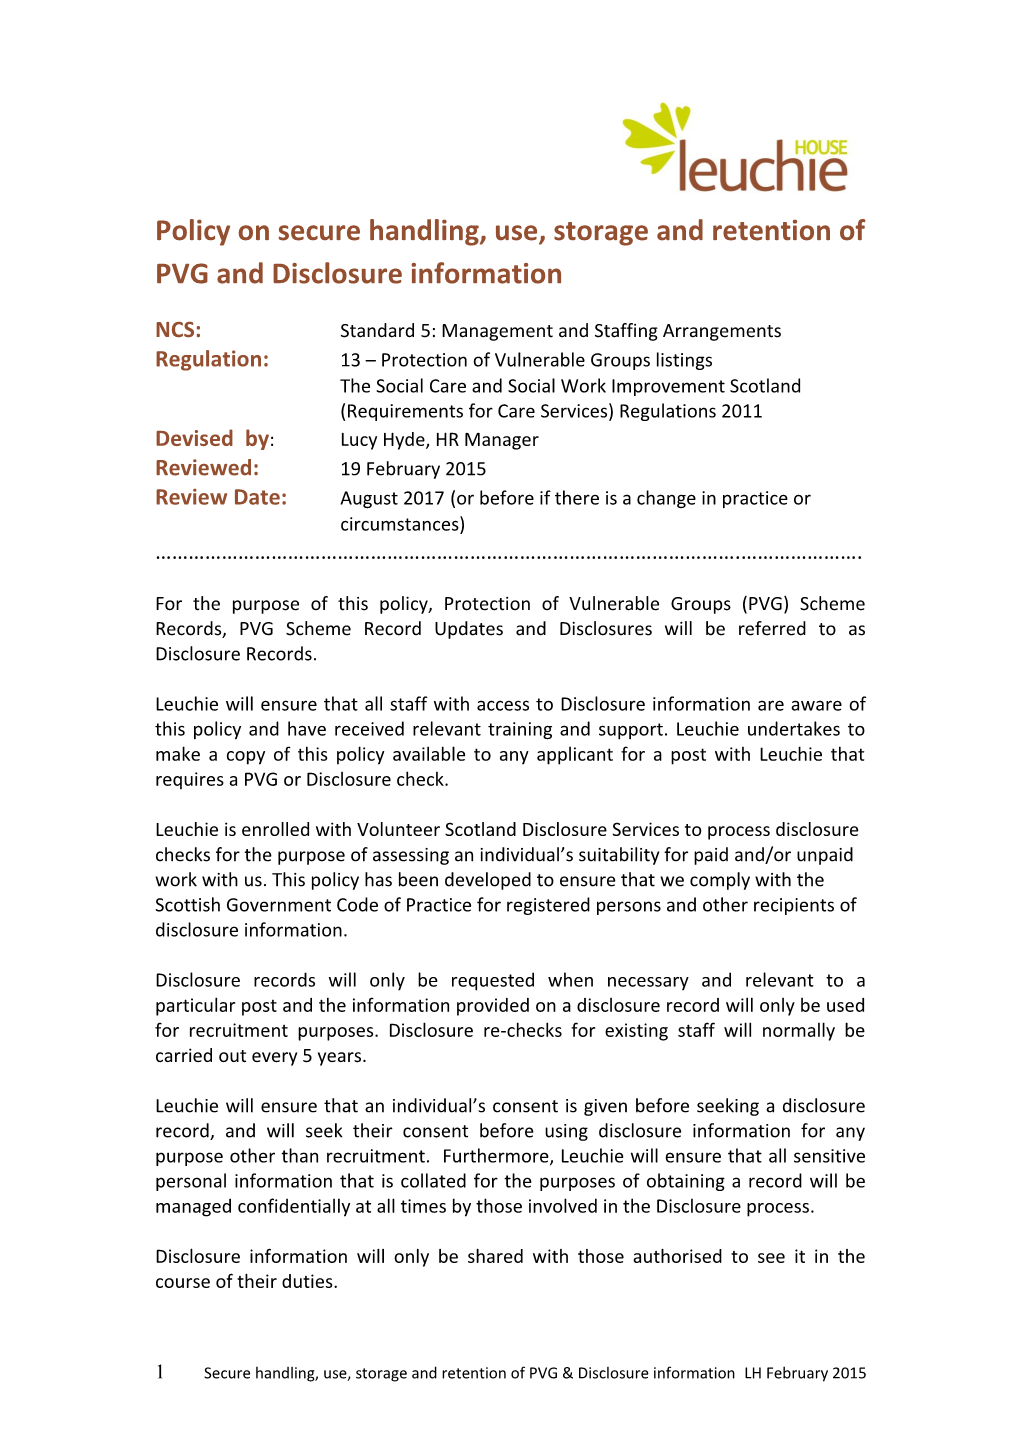 Policy on Secure Handling, Use, Storage and Retention of PVG and Disclosure Information